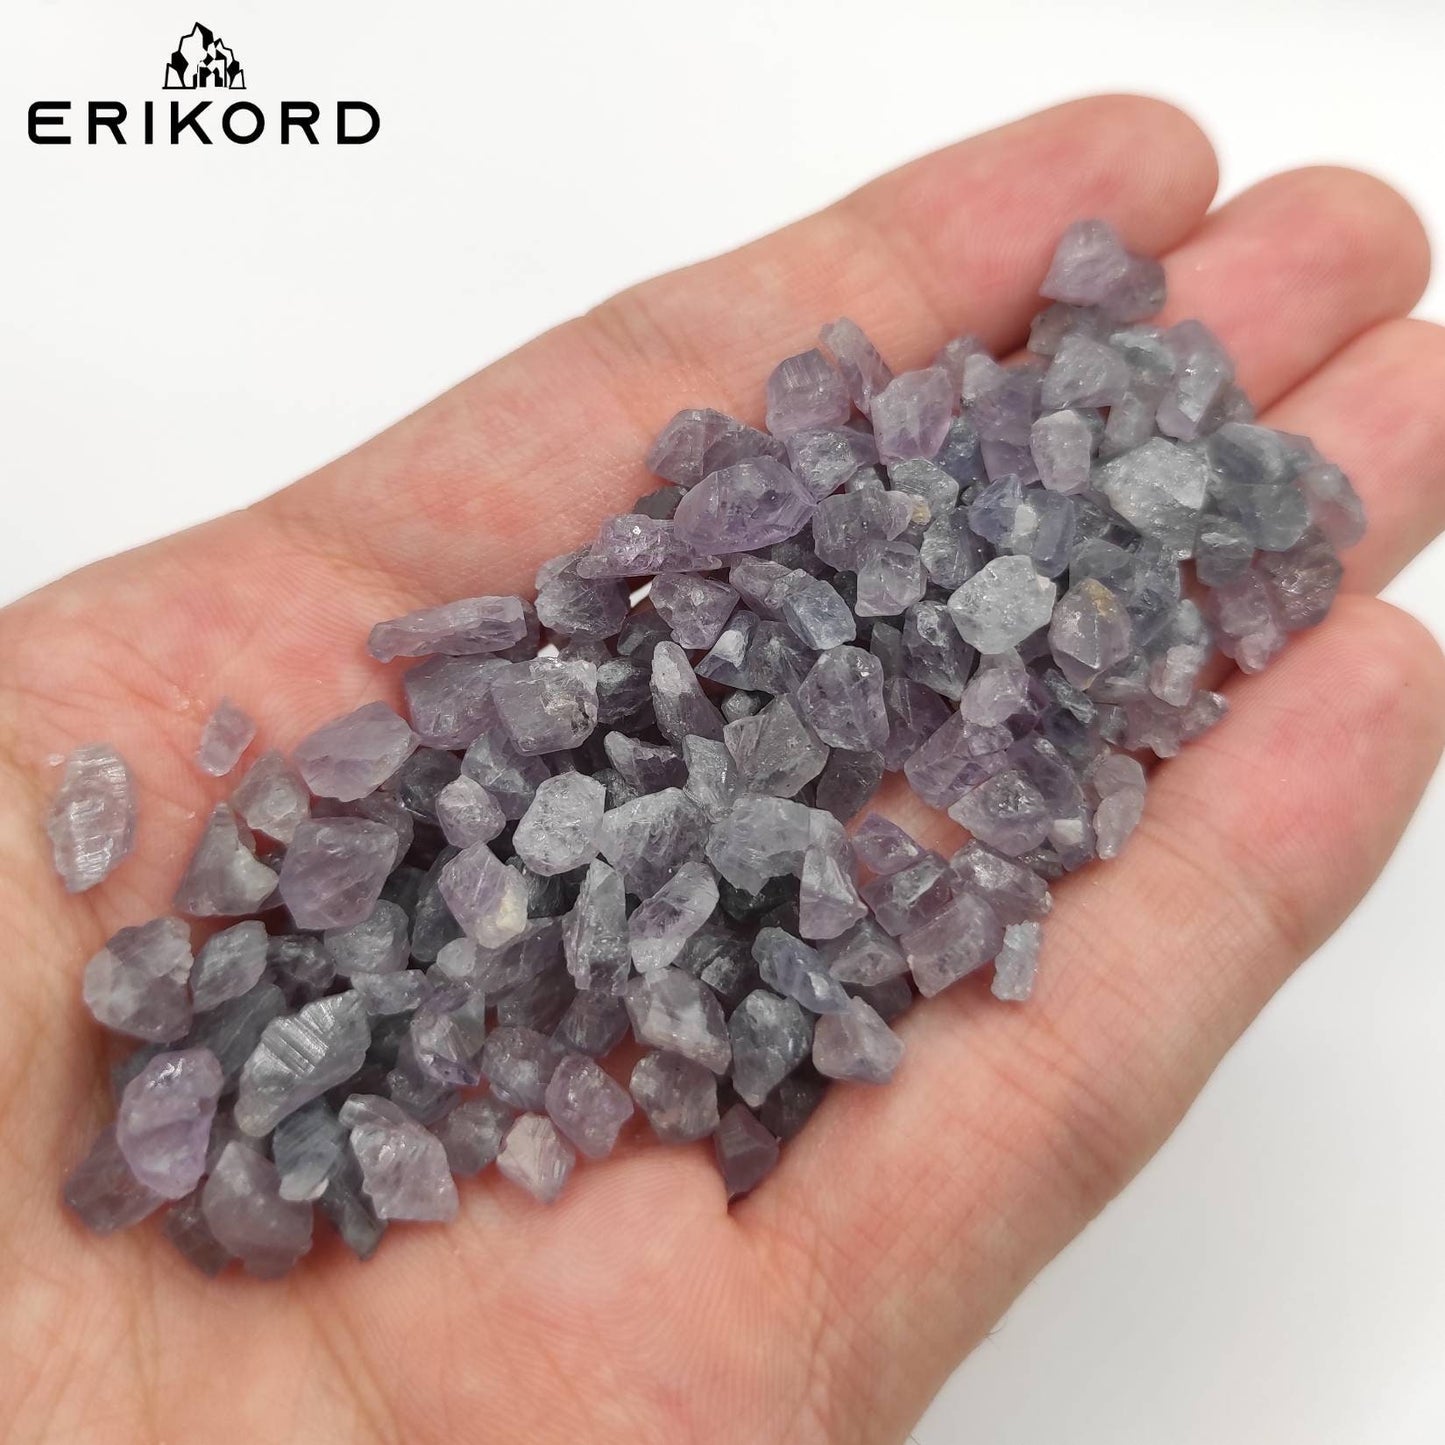 207ct Light Purple Spinel Lot Natural Spinel Untreated Gemstones Loose Spinel Rough Spinel Gems Raw Spinel Crystals Purple/Grey Spinel Lot